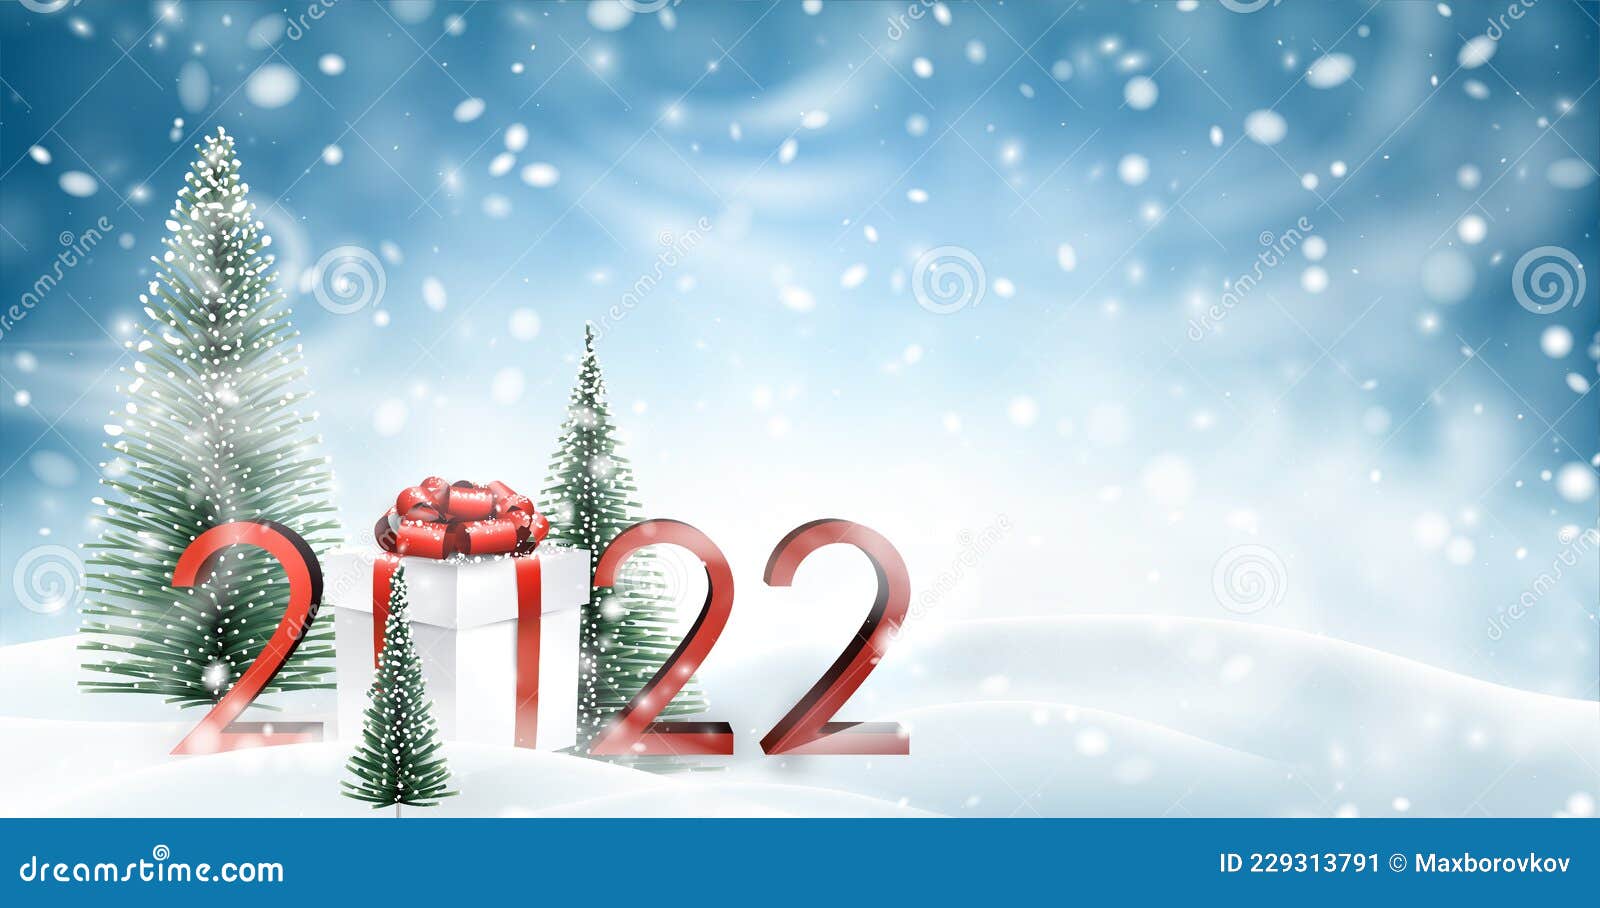 Find the perfect Christmas background images 2022 For your holiday projects, free download